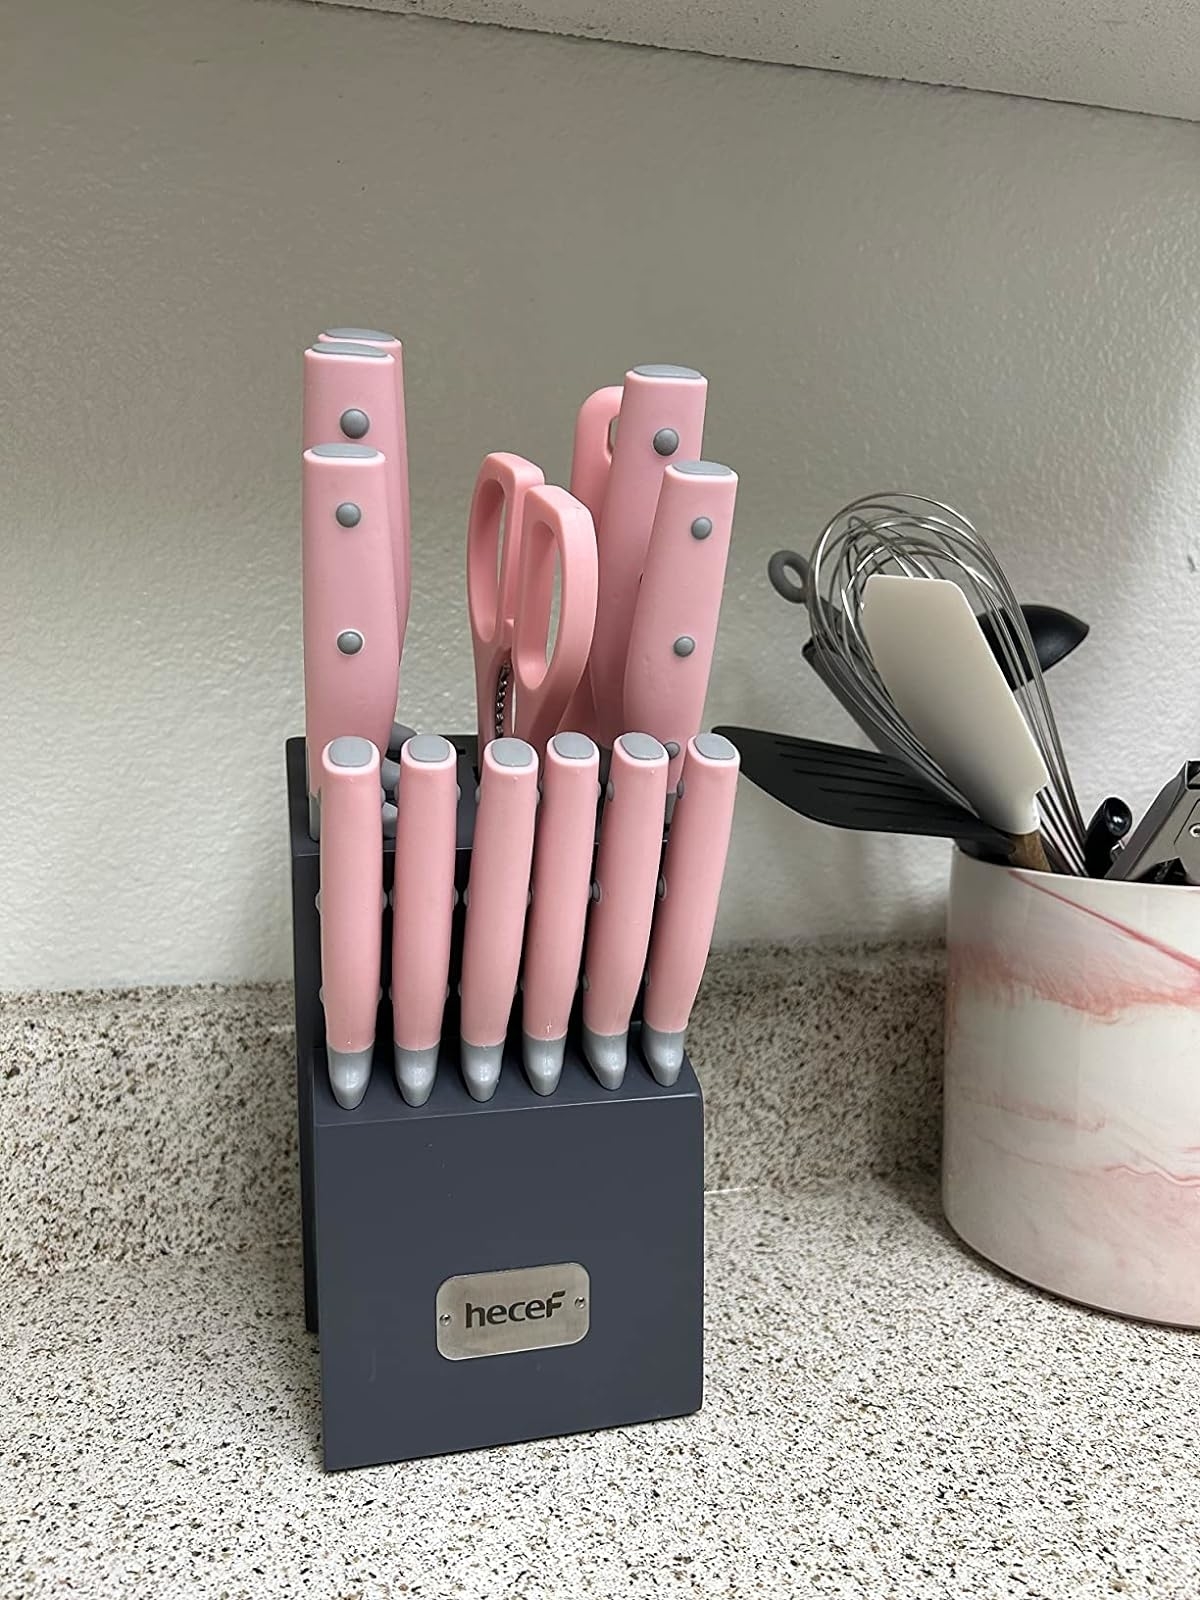 Reviewer image of the pink knife block set on their countertop